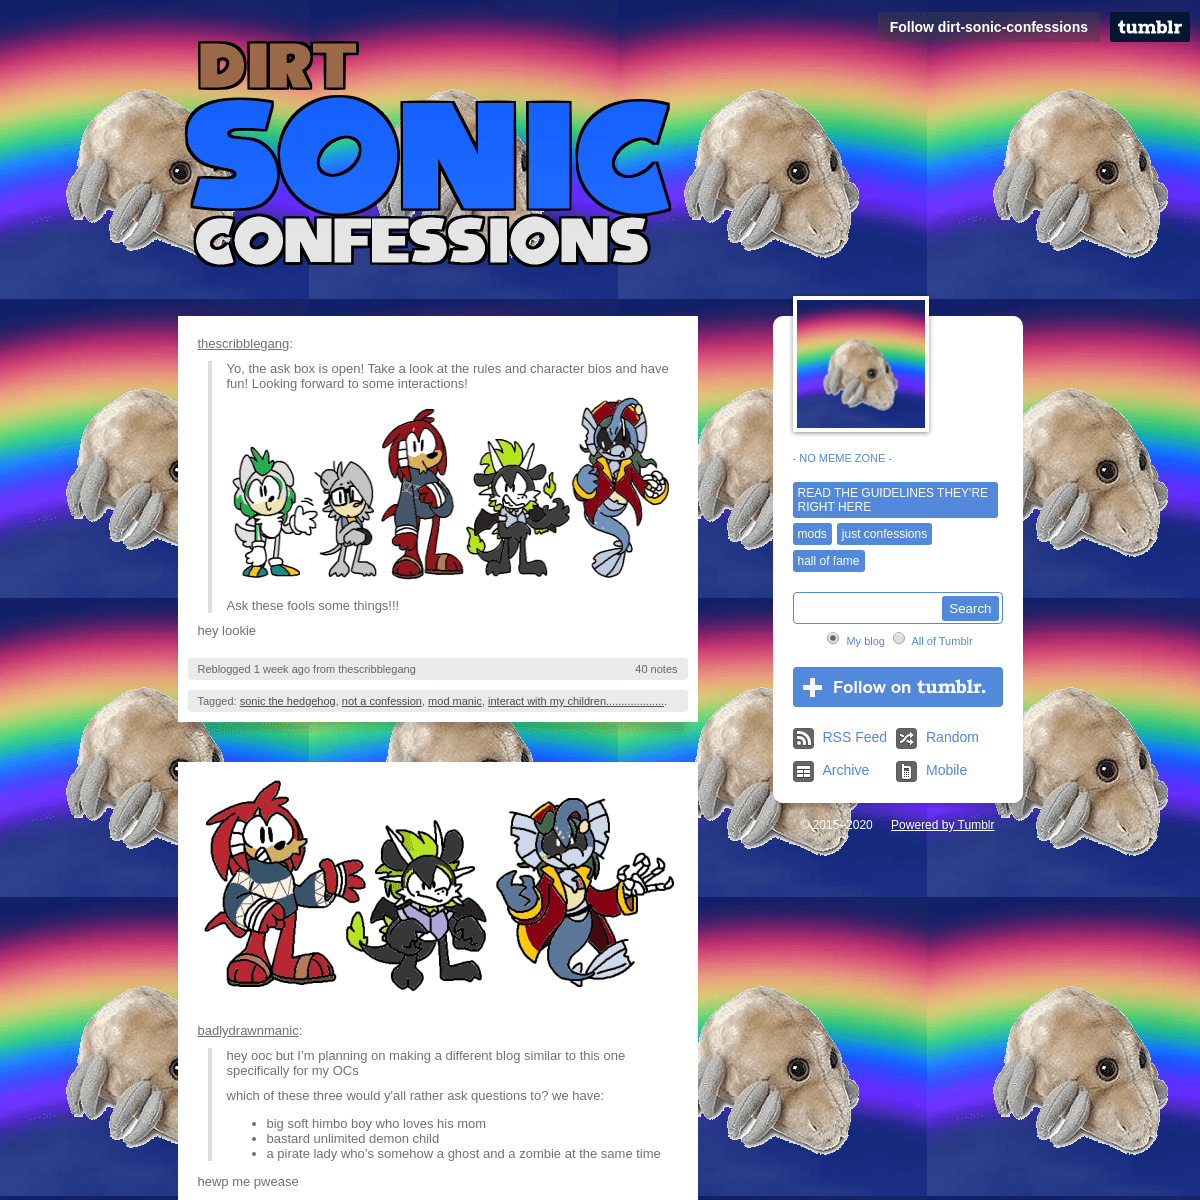 A complete backup of dirt-sonic-confessions.tumblr.com